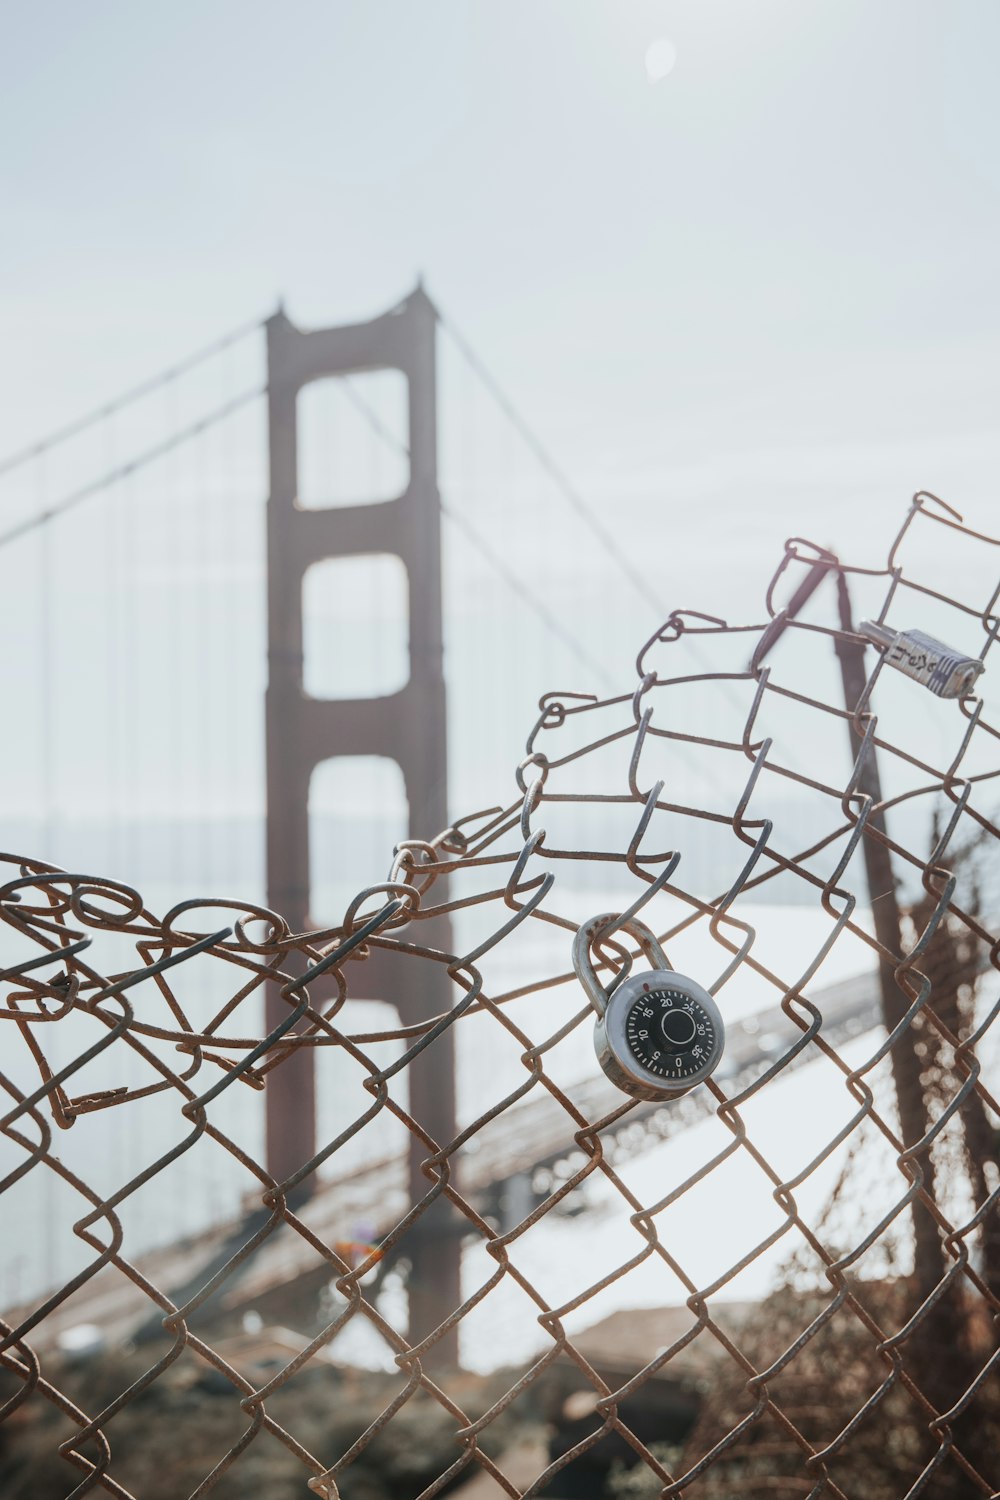 grey metal chain link fence with golden gate bridge in background during daytime